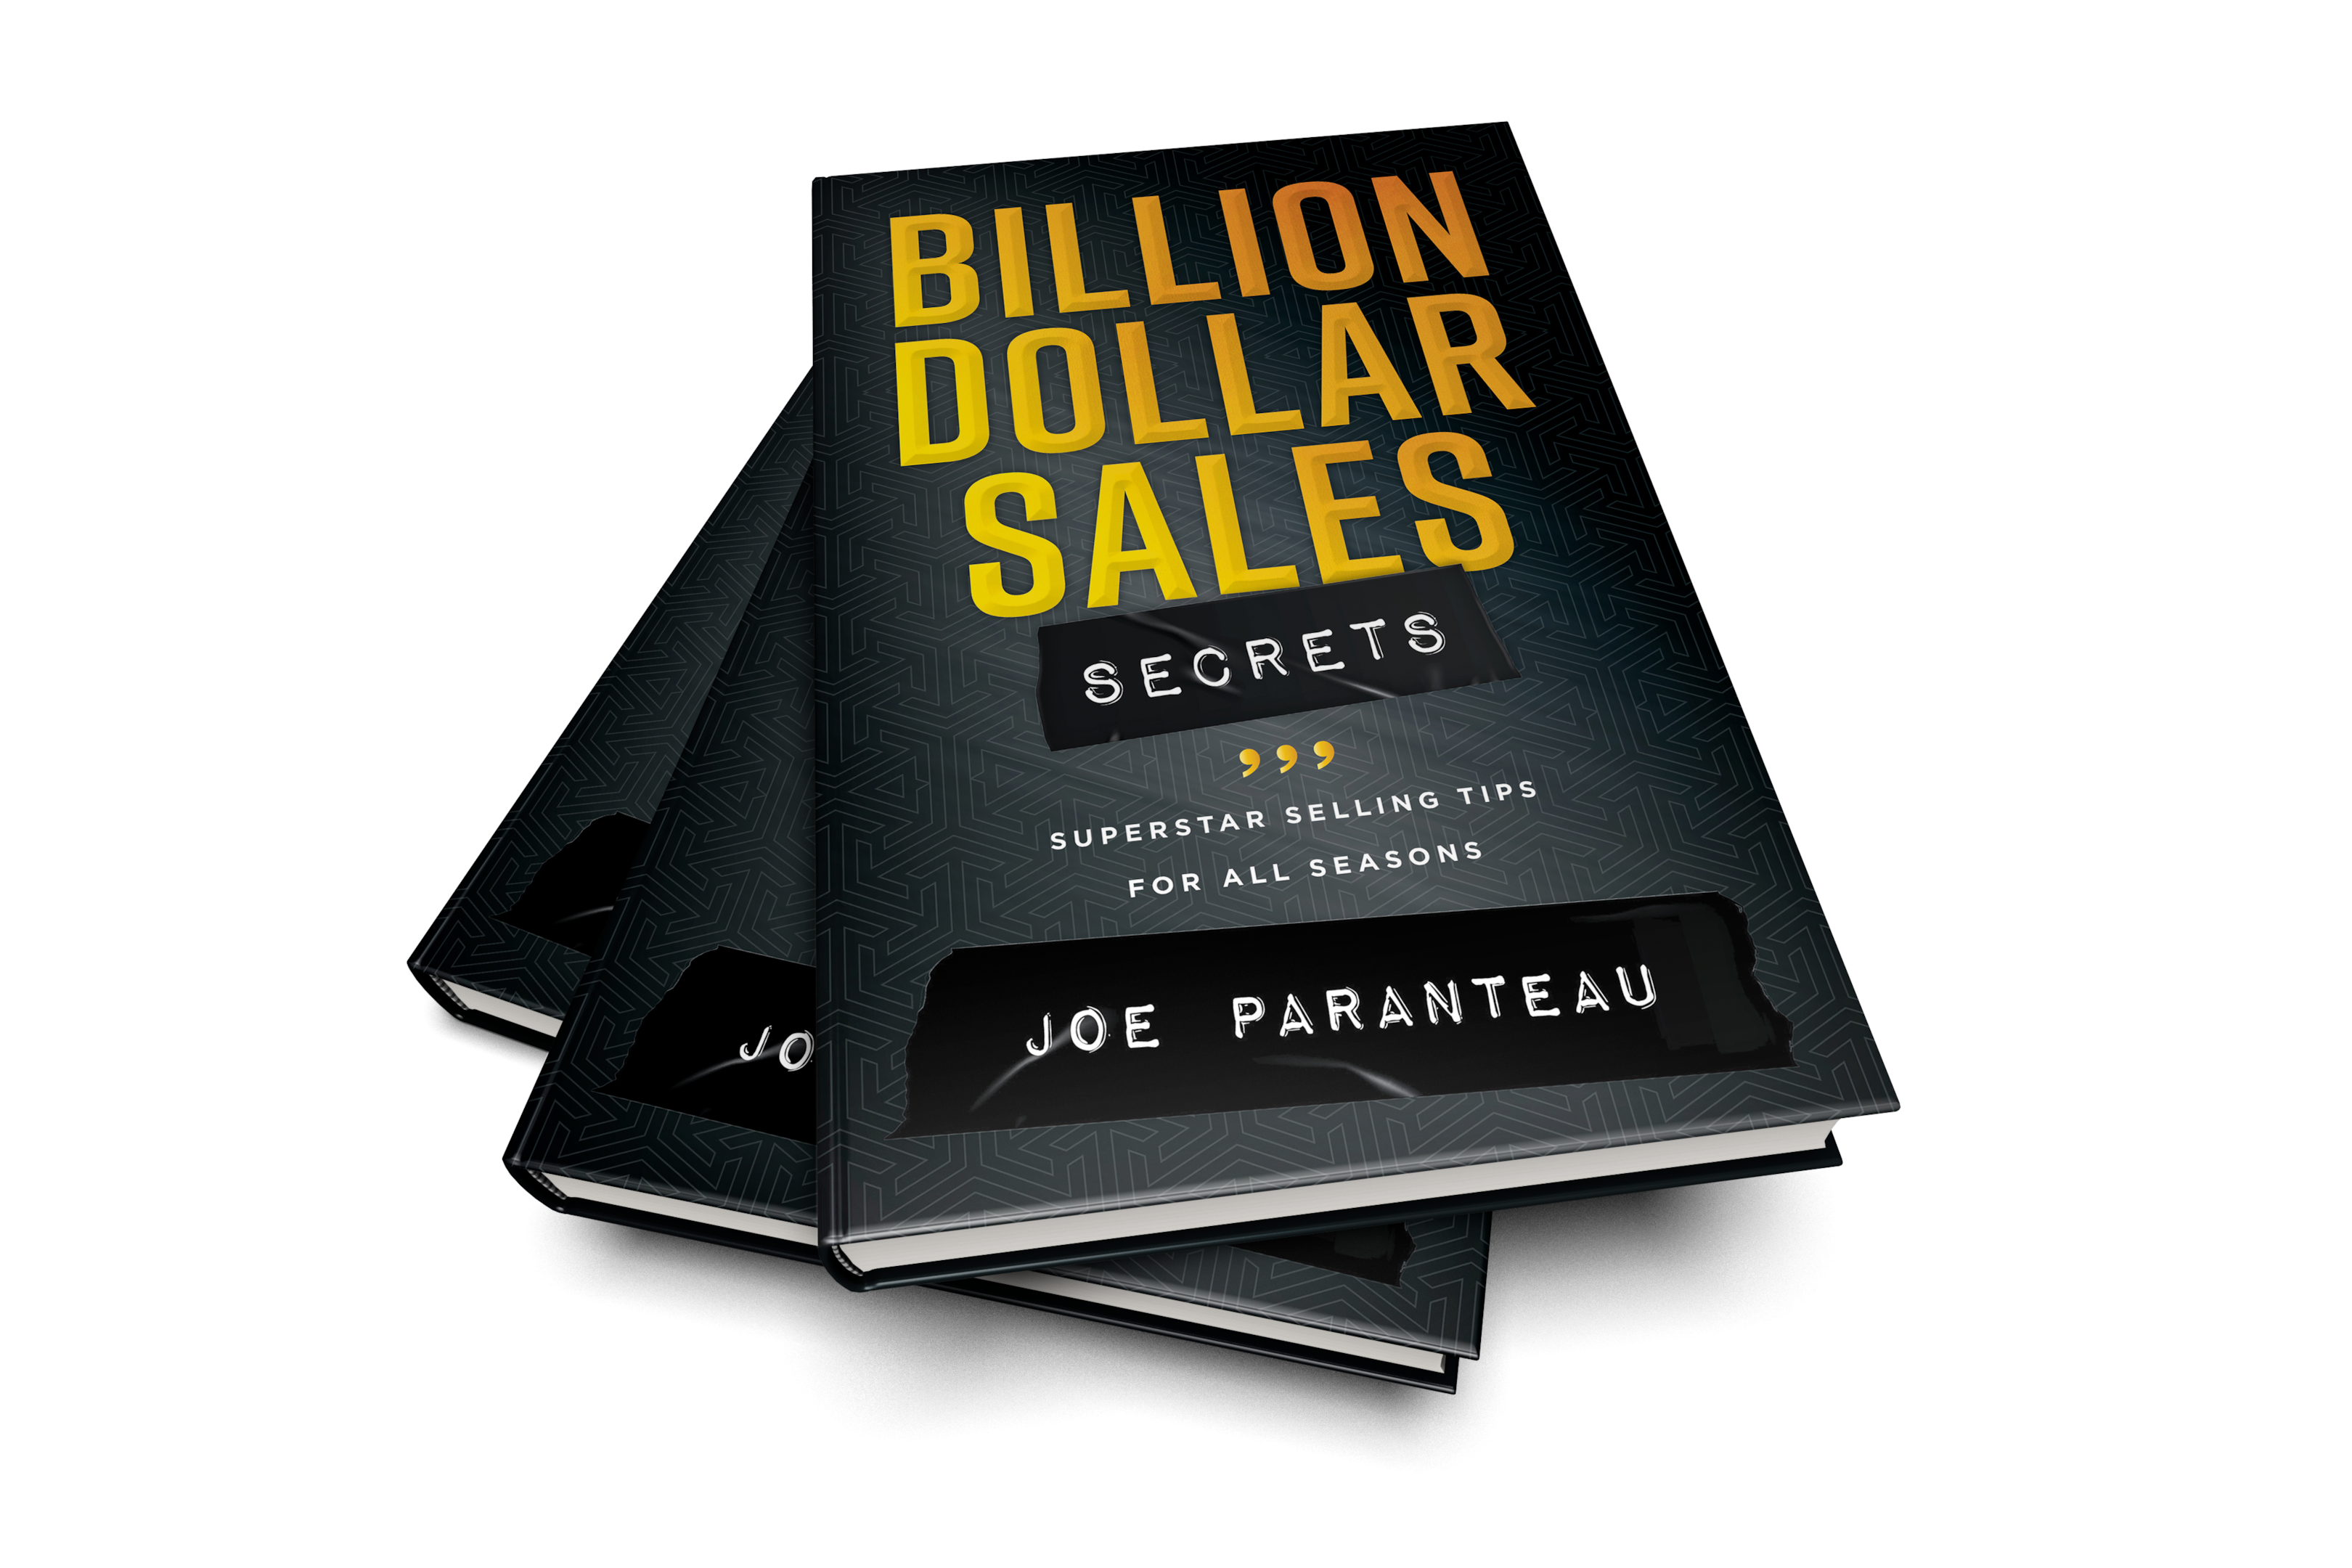 Billion dollar sales secrets:  superstar selling tips for all seasons by joe paranteau. Image of the book standing on its edge to display the cover, while it rests on three books on their side.